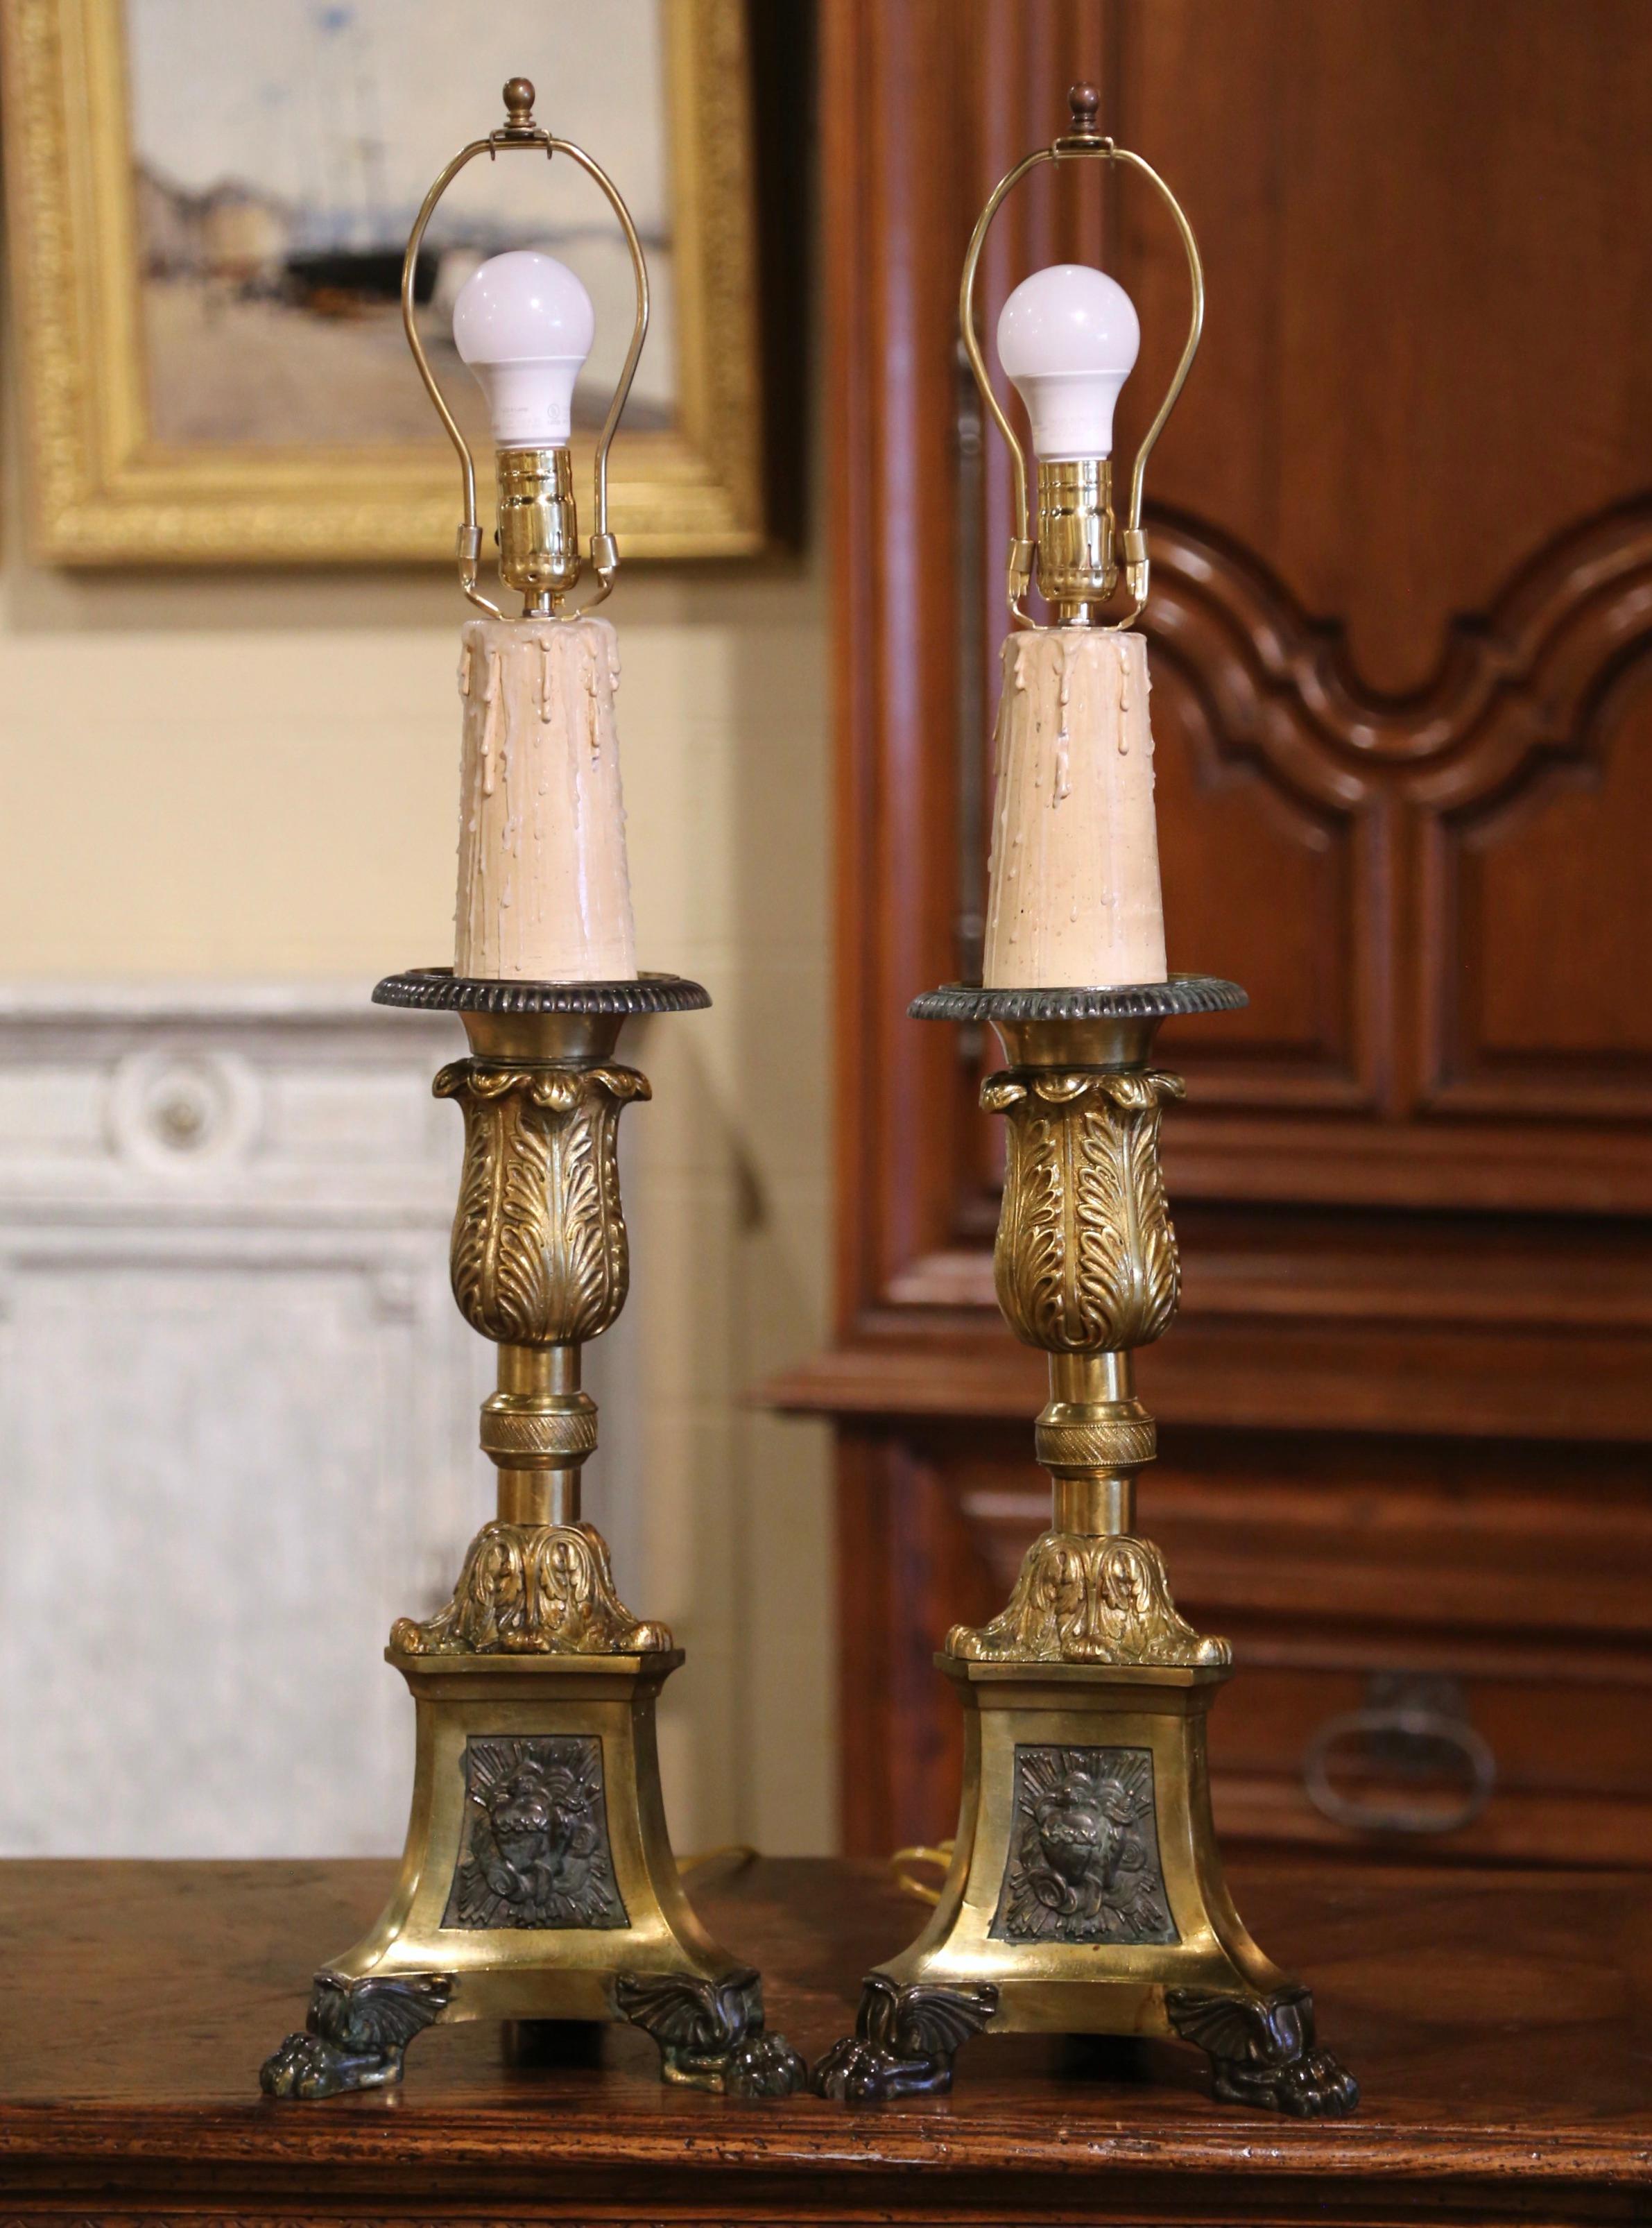 Decorate a living or dining room with these antique church prickets table lamps. Crafted in France, circa 1870, the ornate brass candlesticks sit on a triangle base ending with three paw feet at the base. Each religious candle holder features a